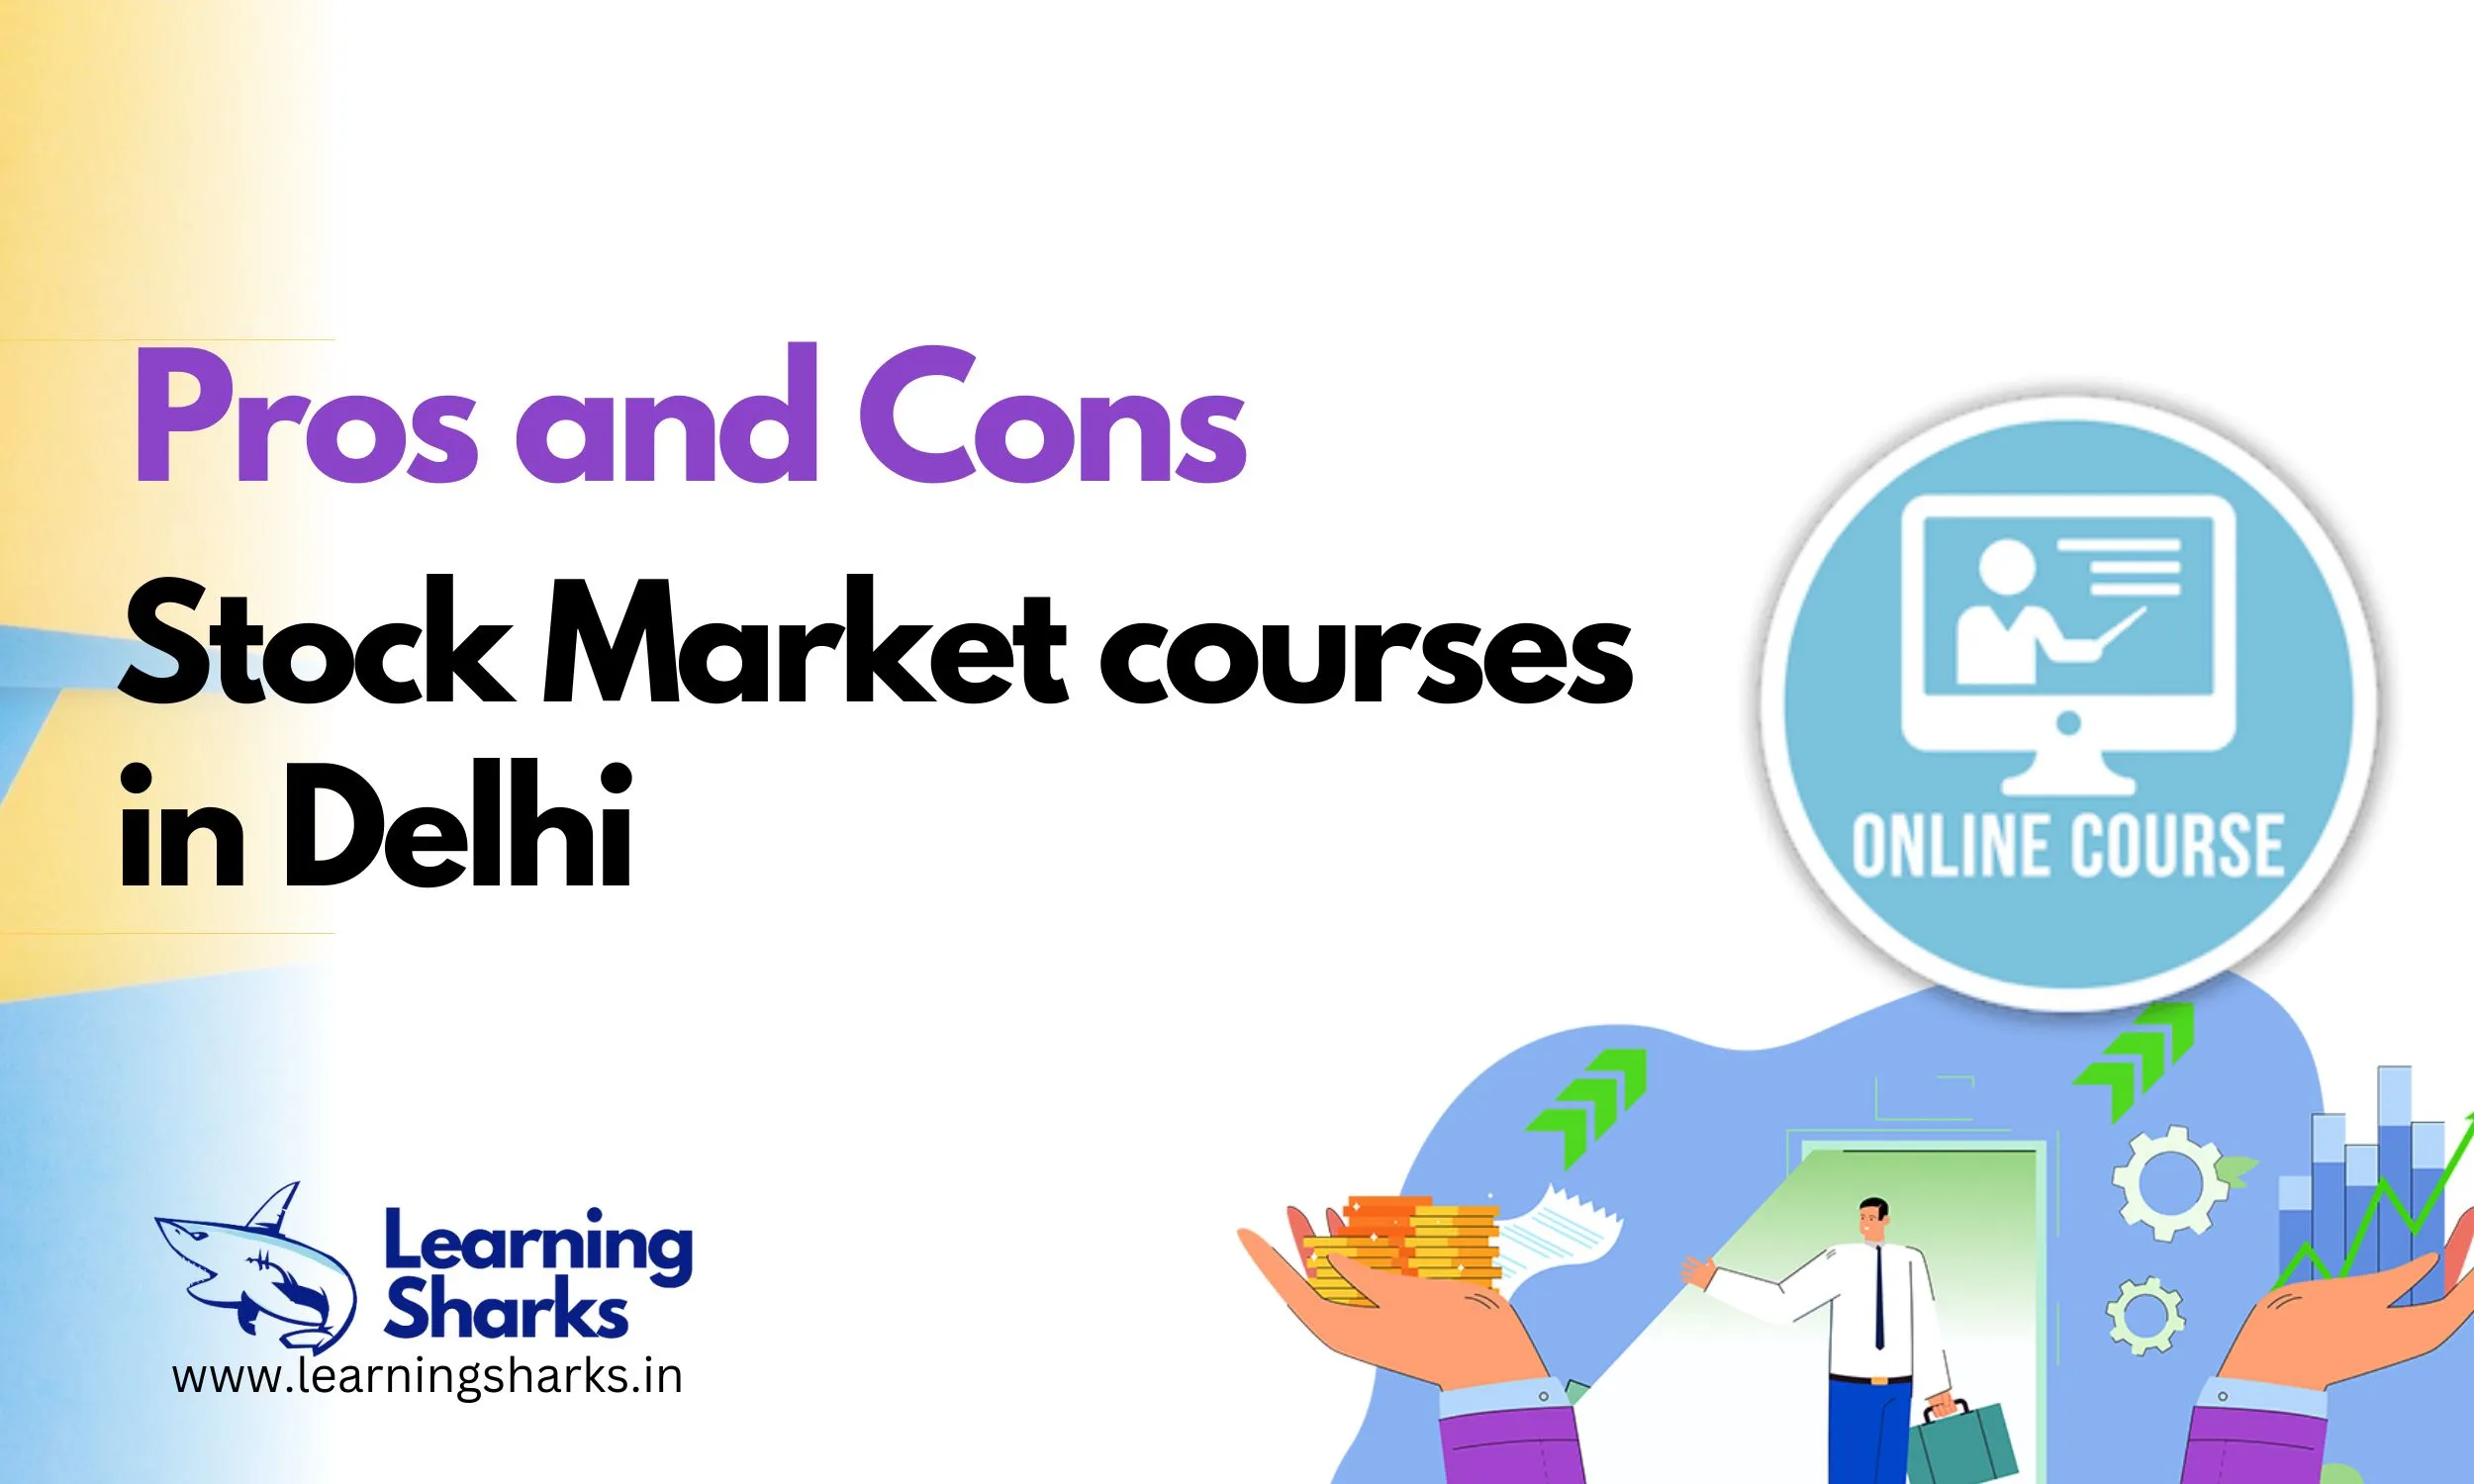 Stock Market courses in Delhi l Pros and Cons Learning sharksShare